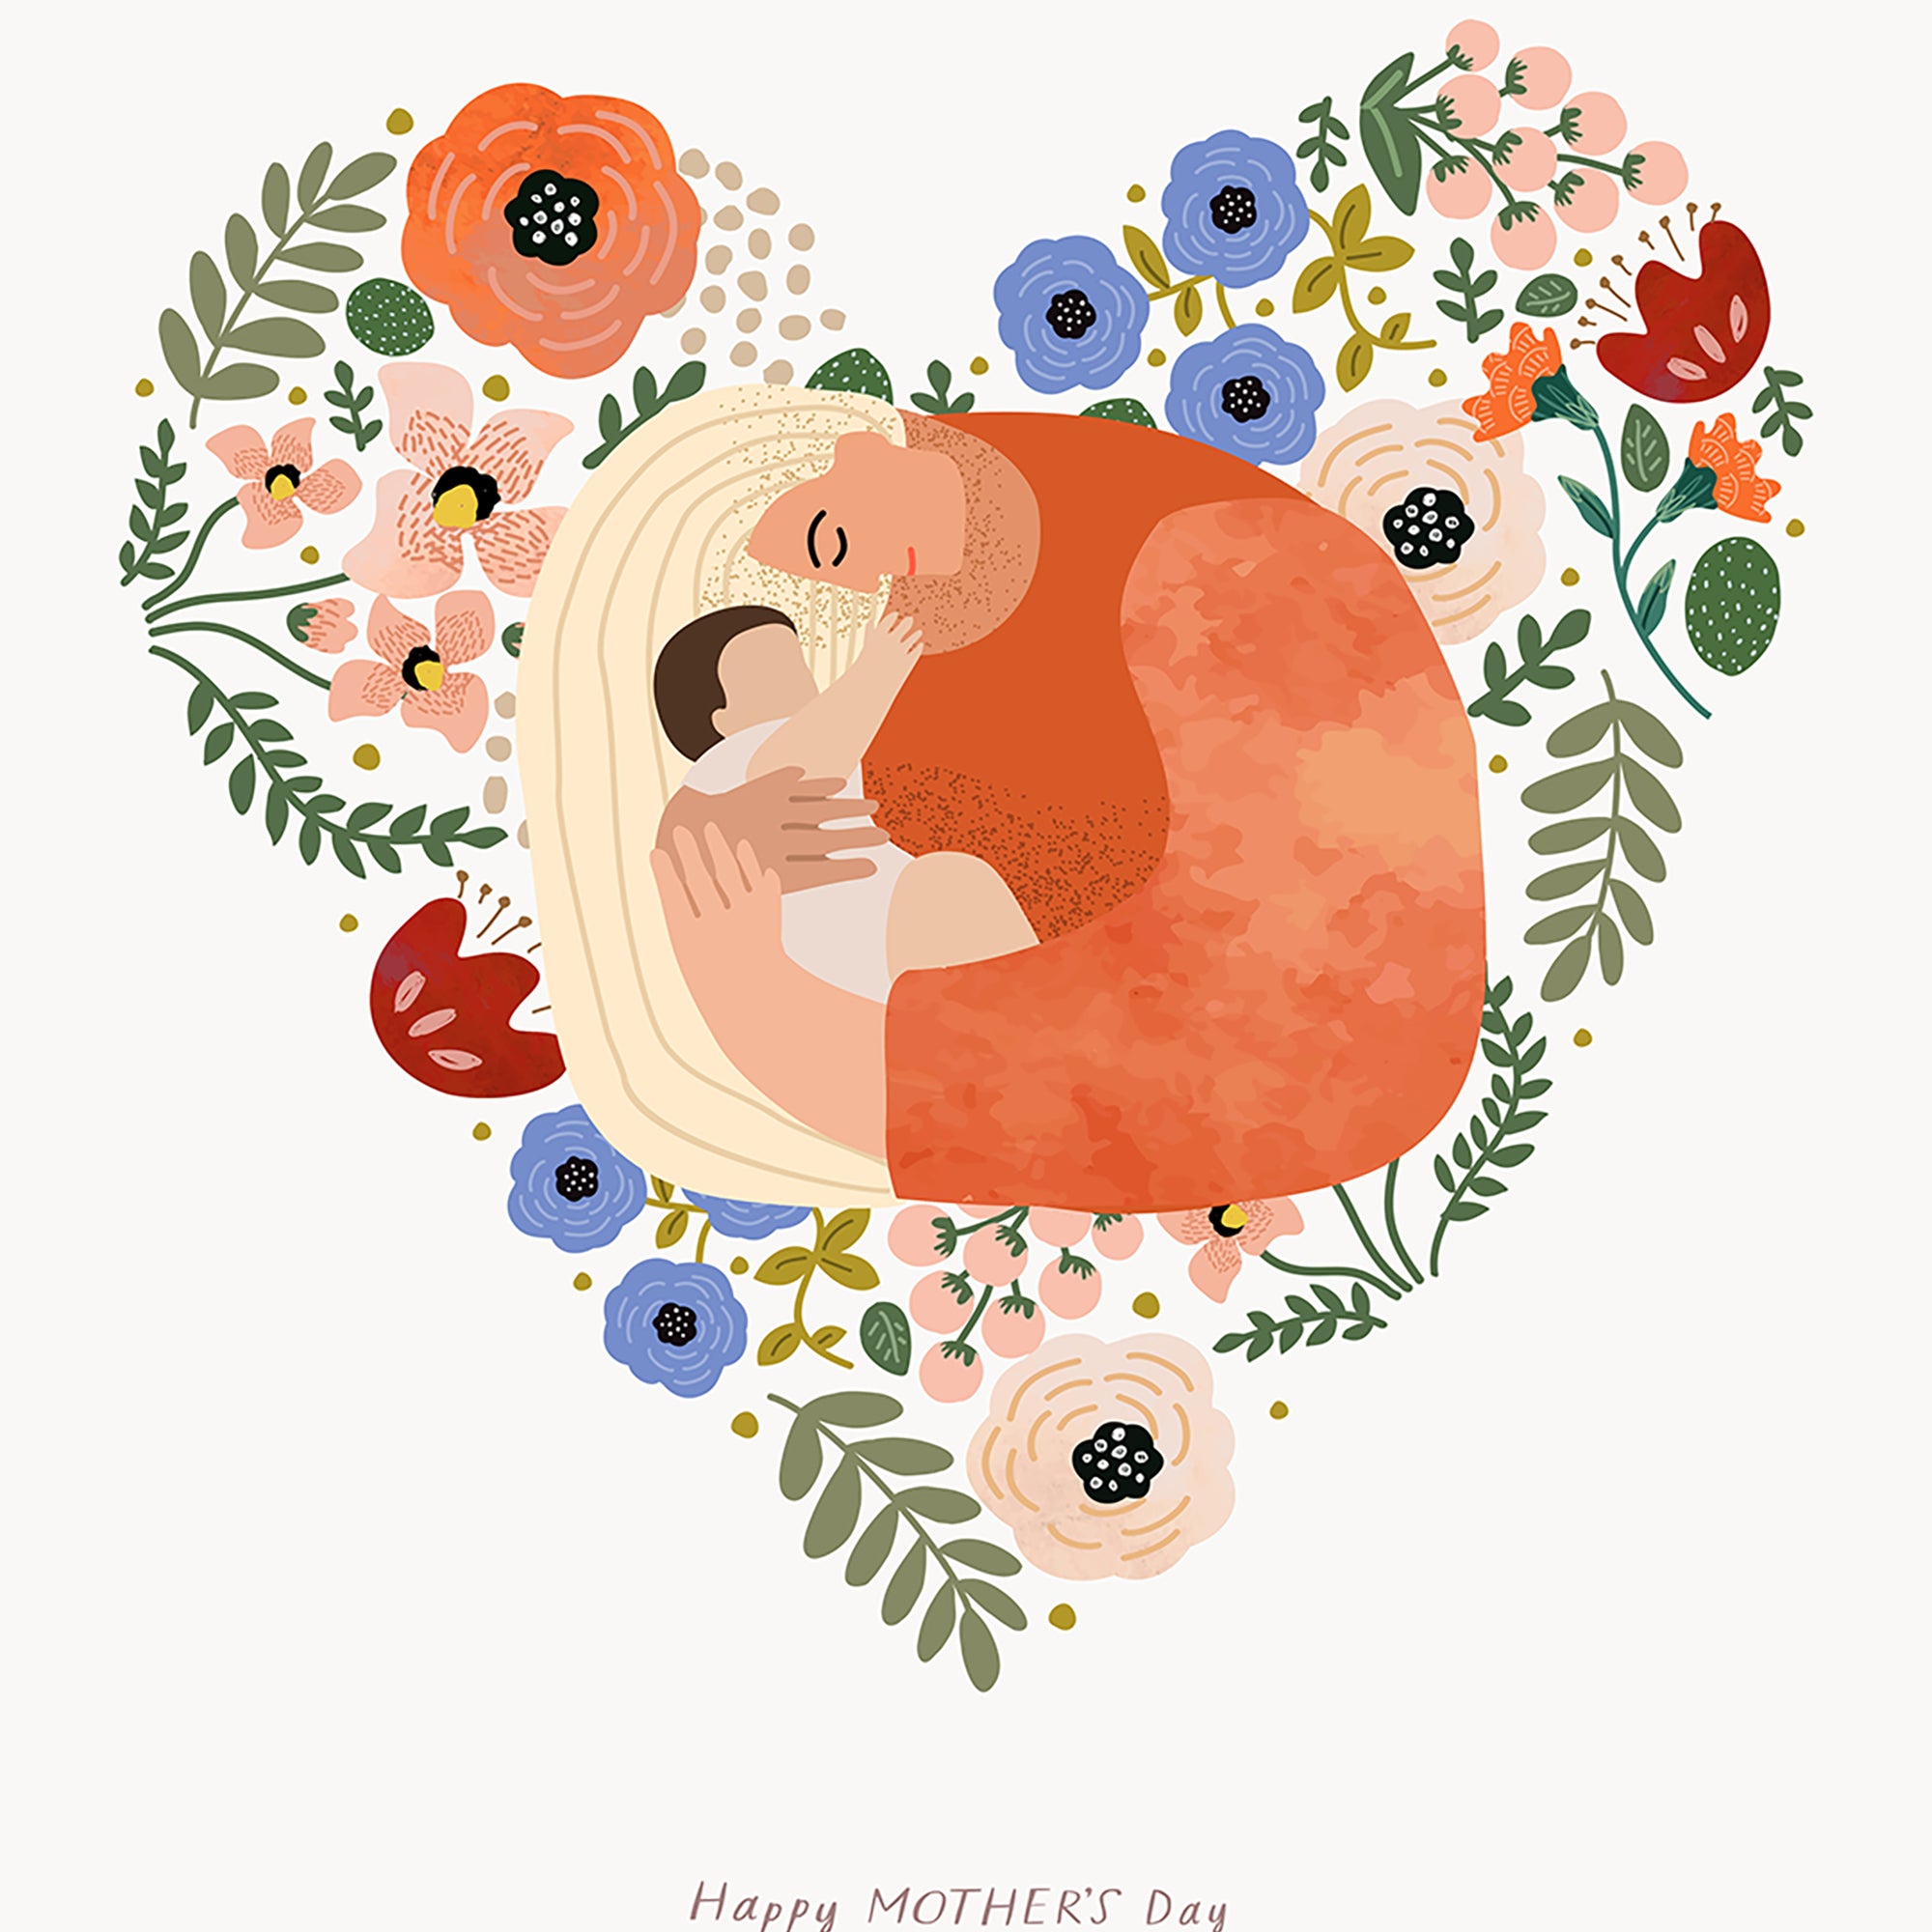 Do you know where does mother's day come from?